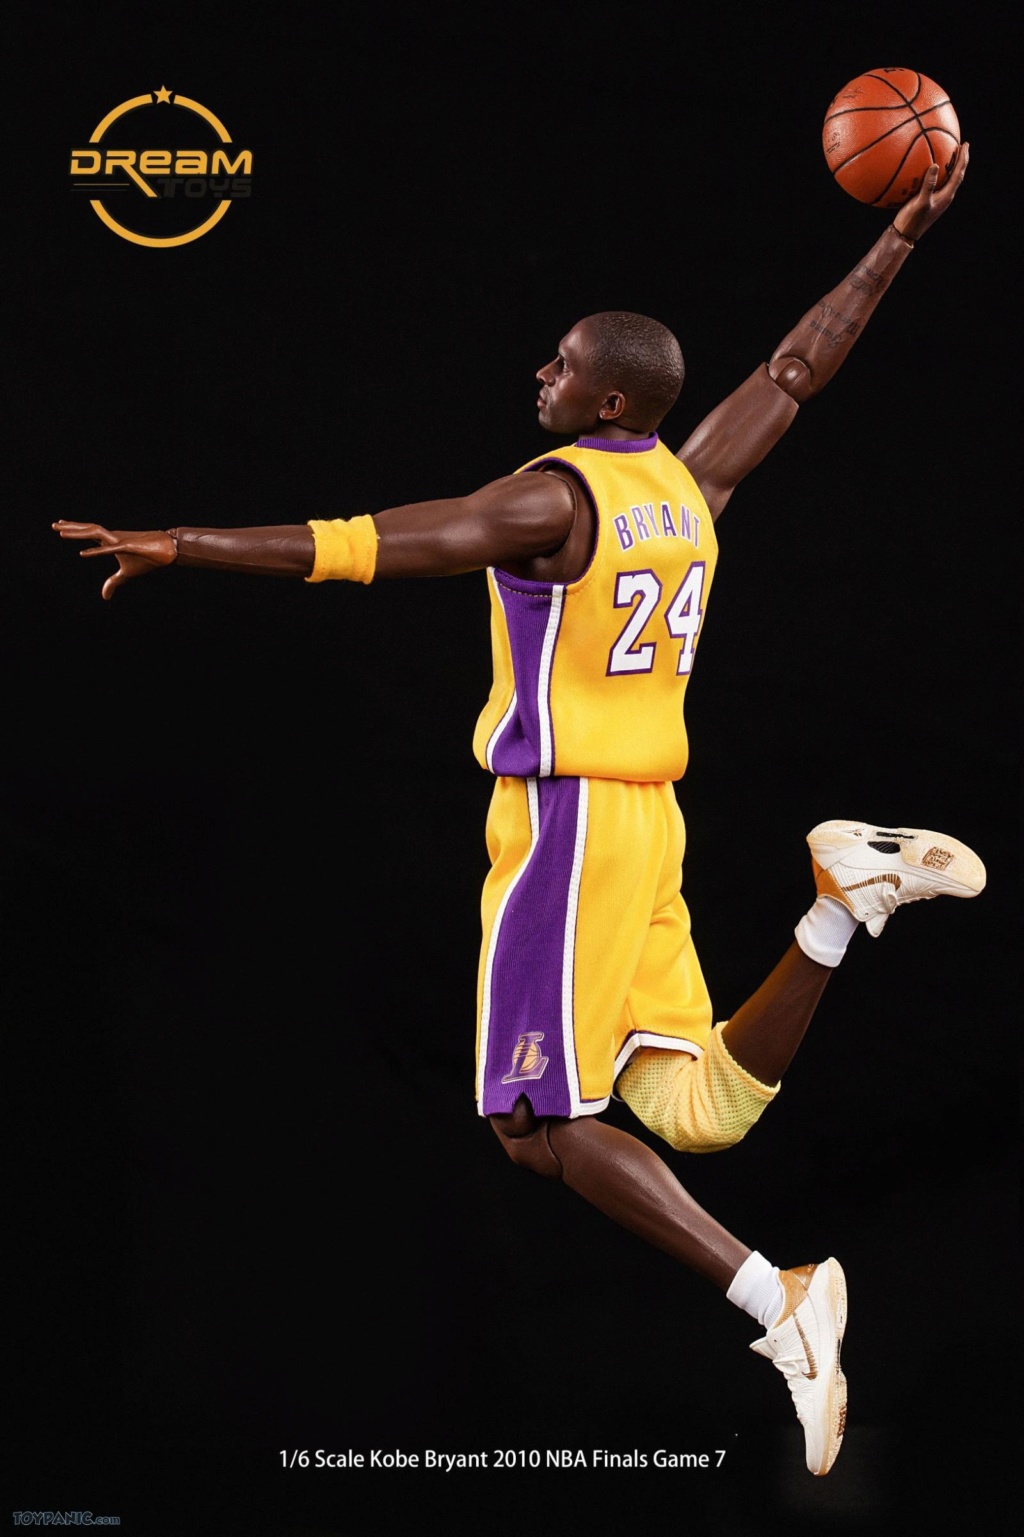 BasketBall - NEW PRODUCT: DreamToys: NBA Finals Jordan, Bryant, & James 1/6 scale action figures 11420235